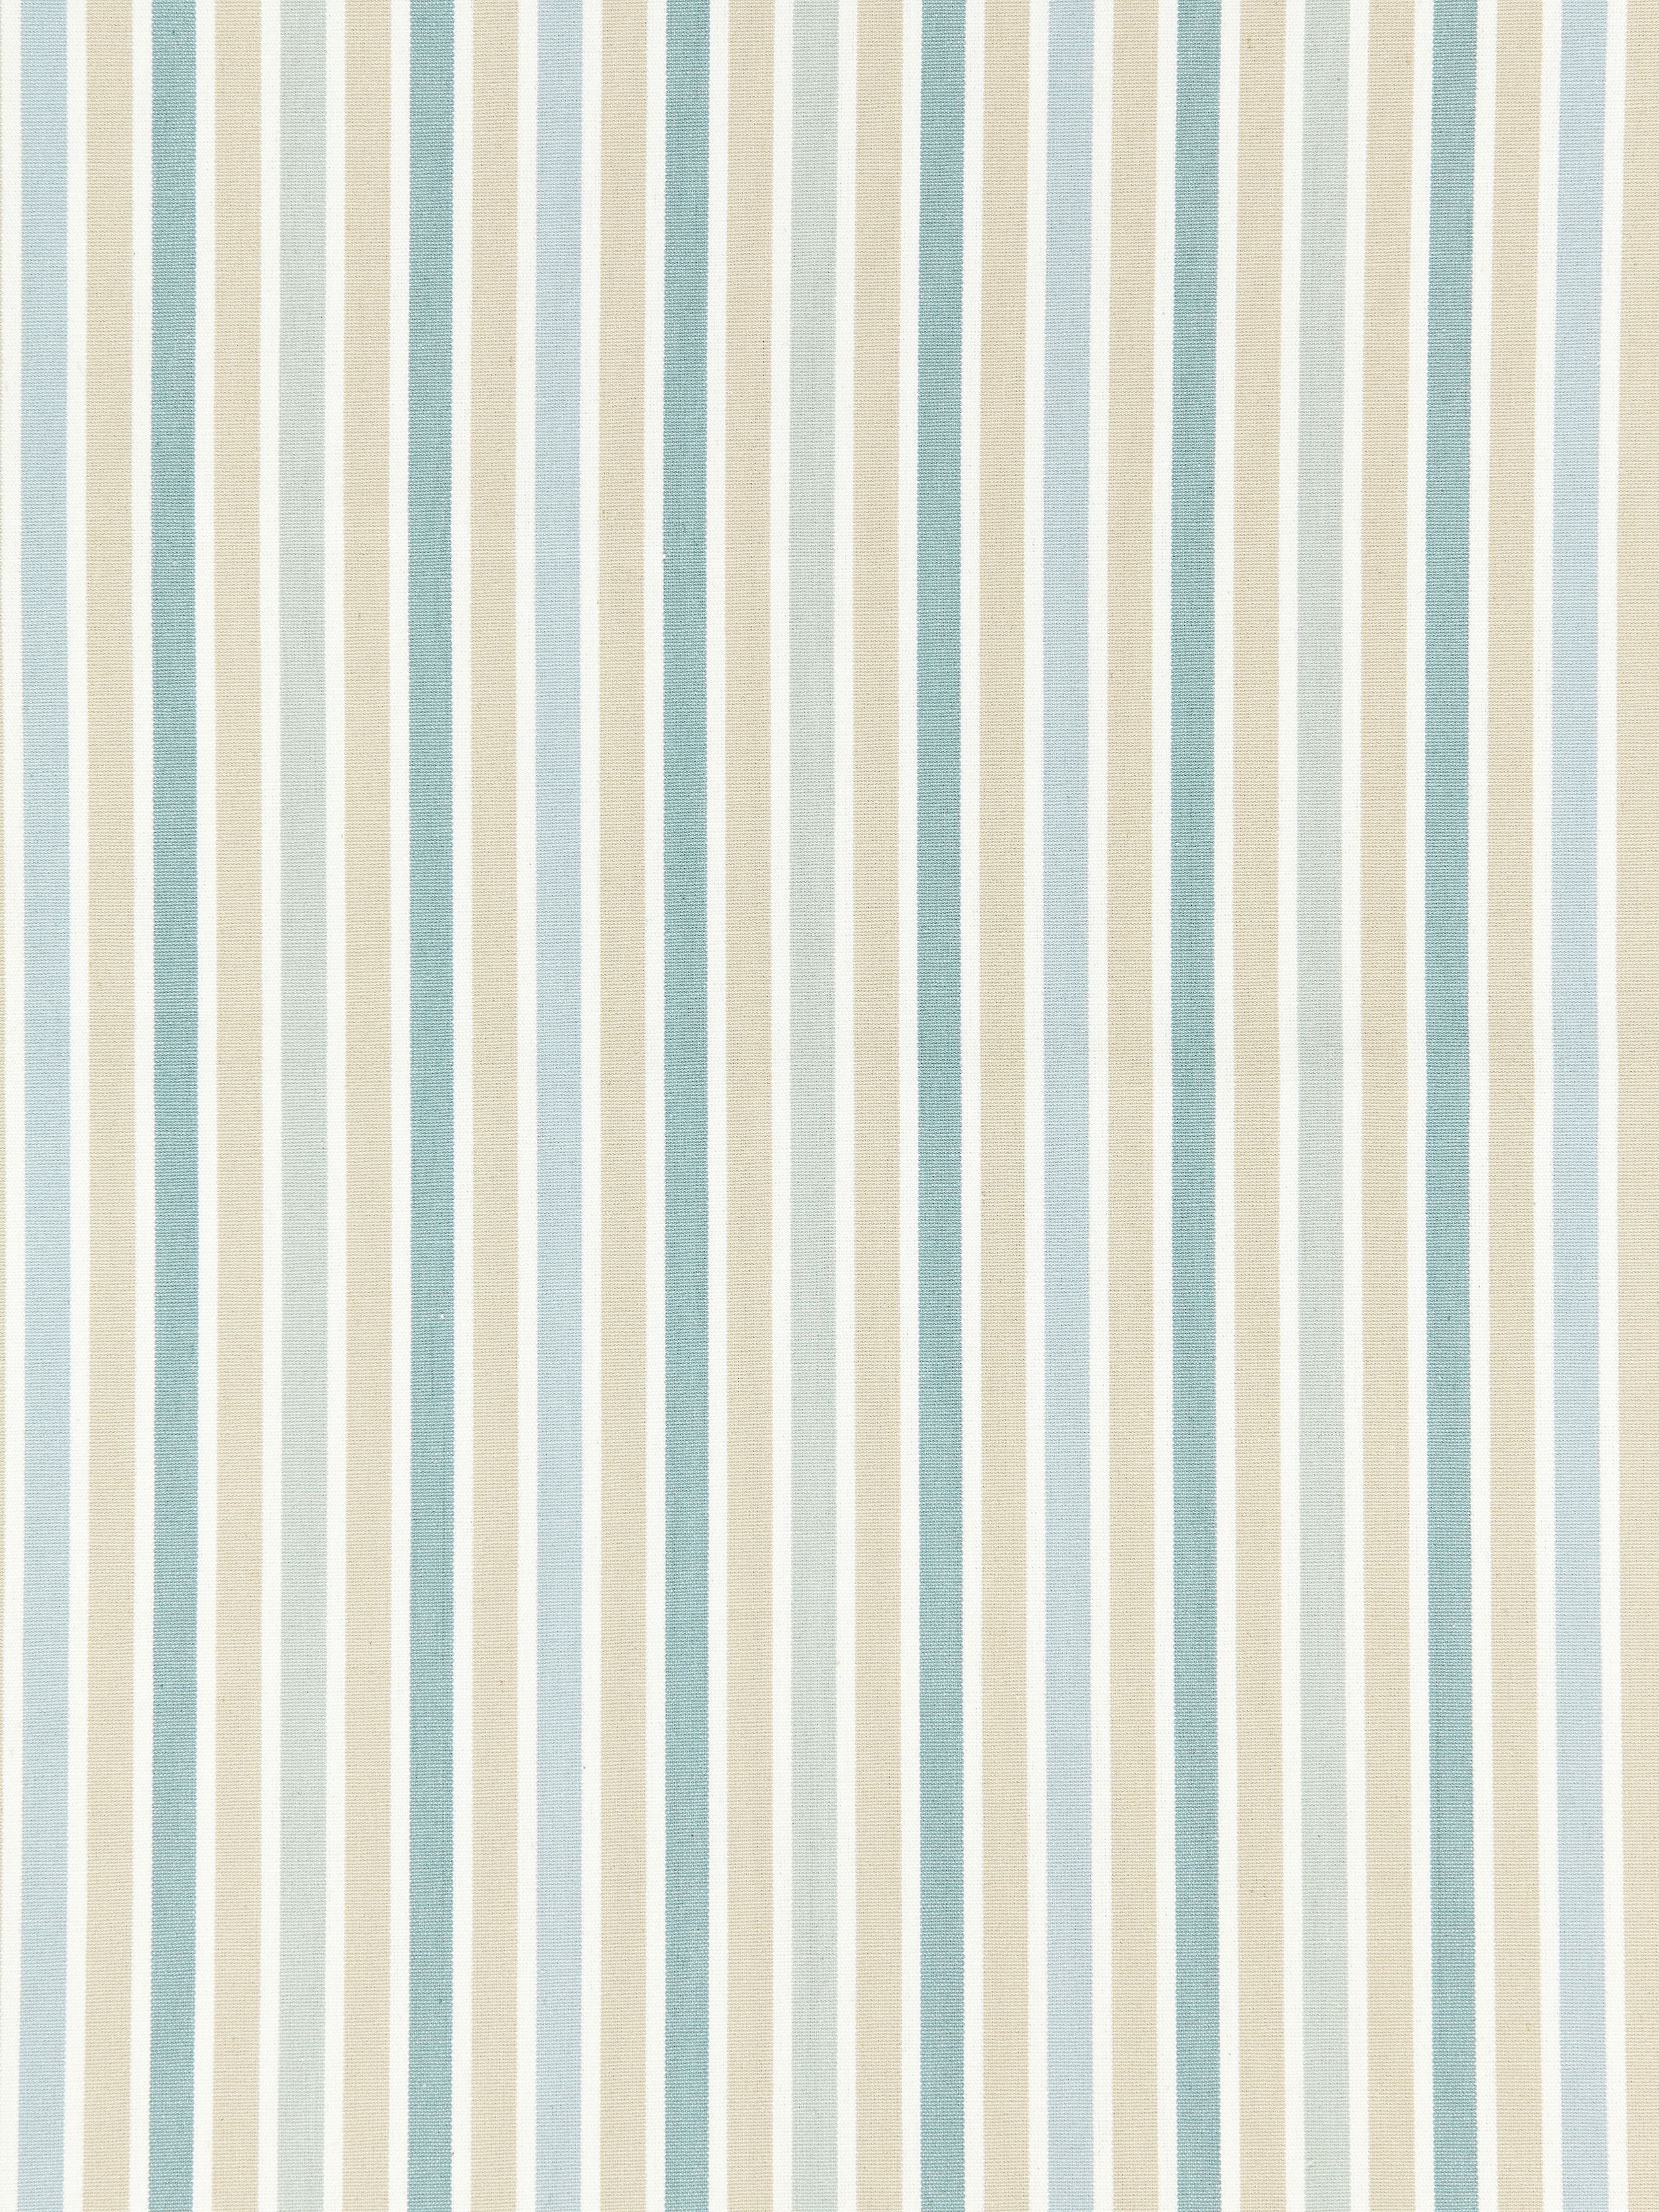 Leeds Cotton Stripe fabric in seaglass color - pattern number SC 000127114 - by Scalamandre in the Scalamandre Fabrics Book 1 collection